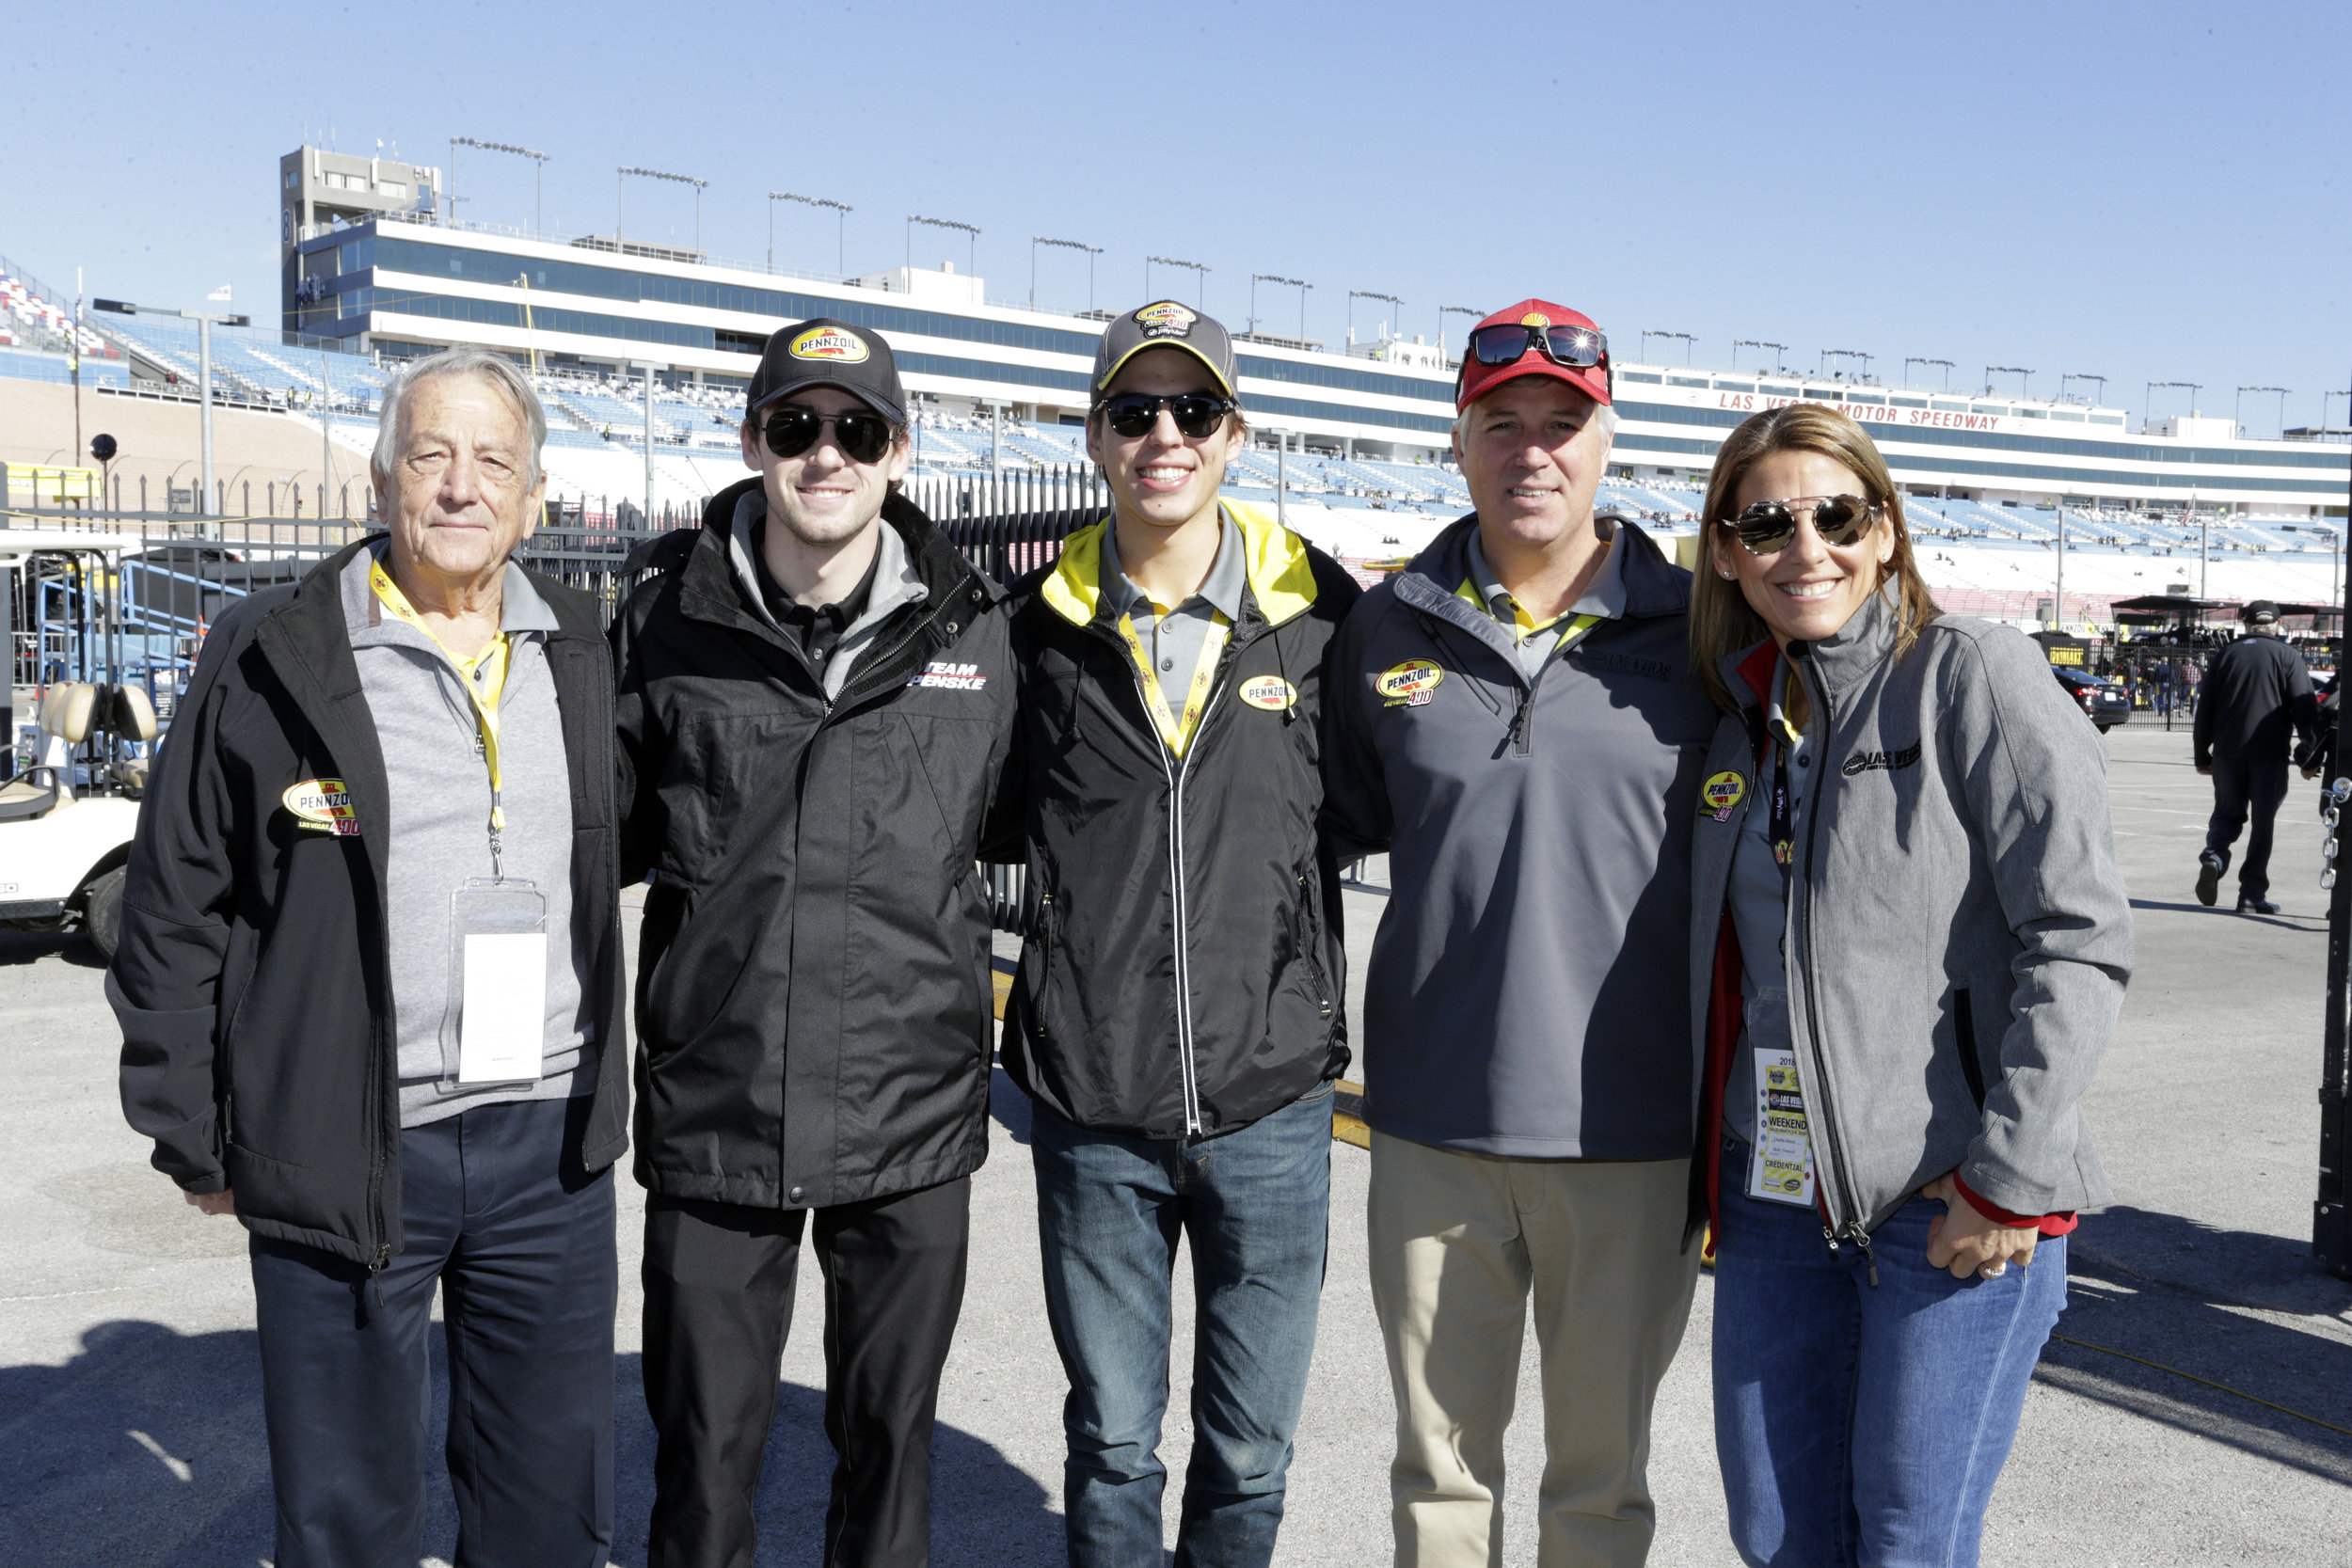 The Maurer family meets with Ryan Blaney ahead of the Pennzoil 400